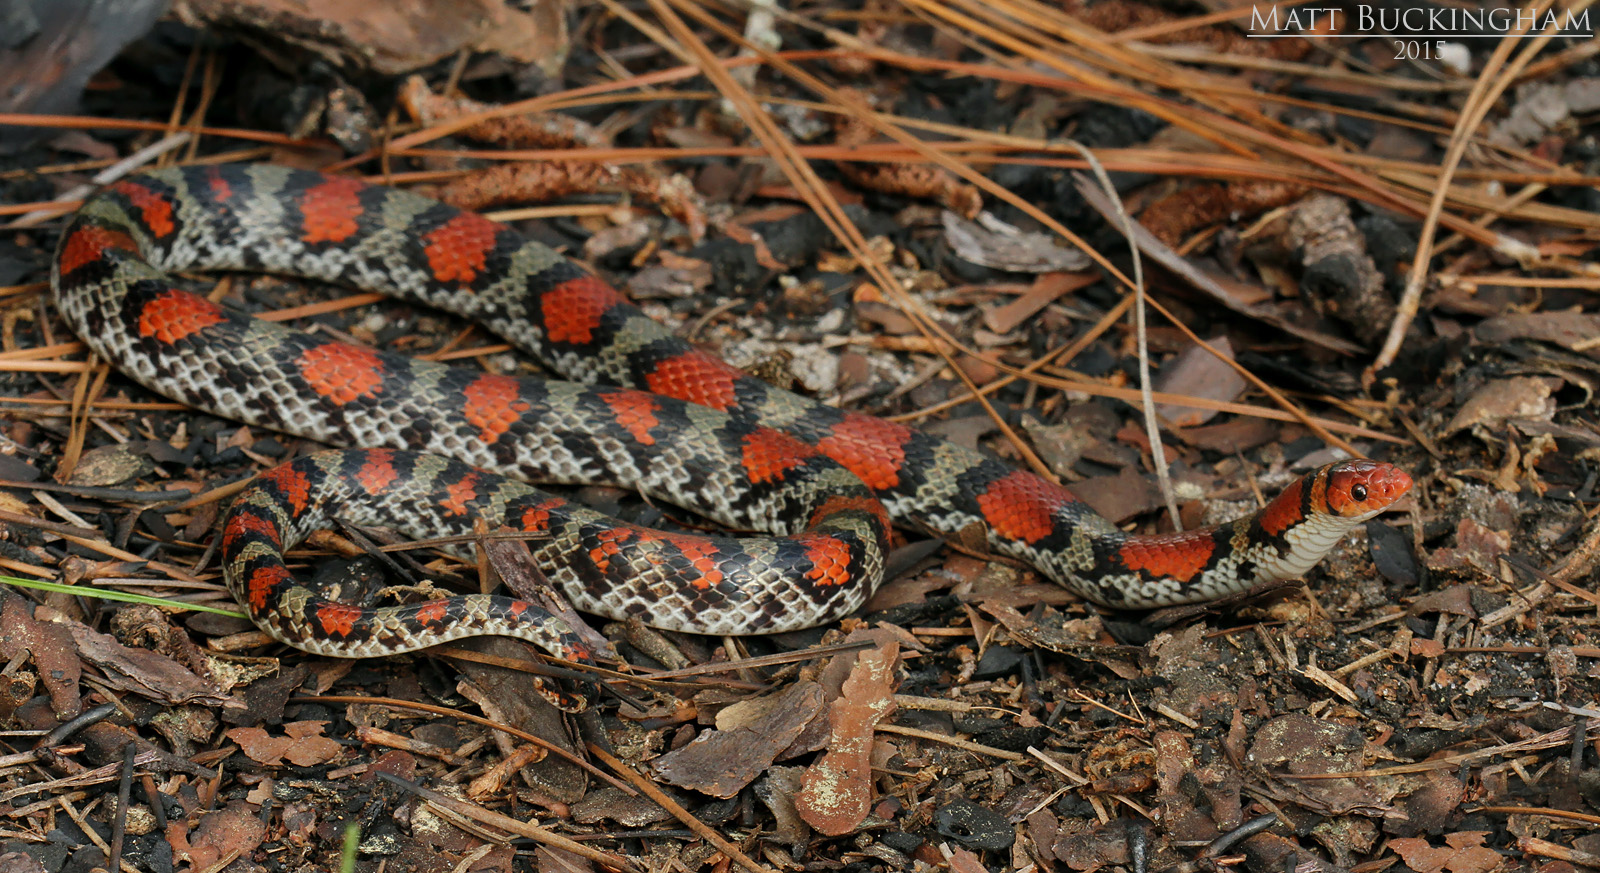 Reptiles and Amphibians of the Longleaf Pine Ecosystem